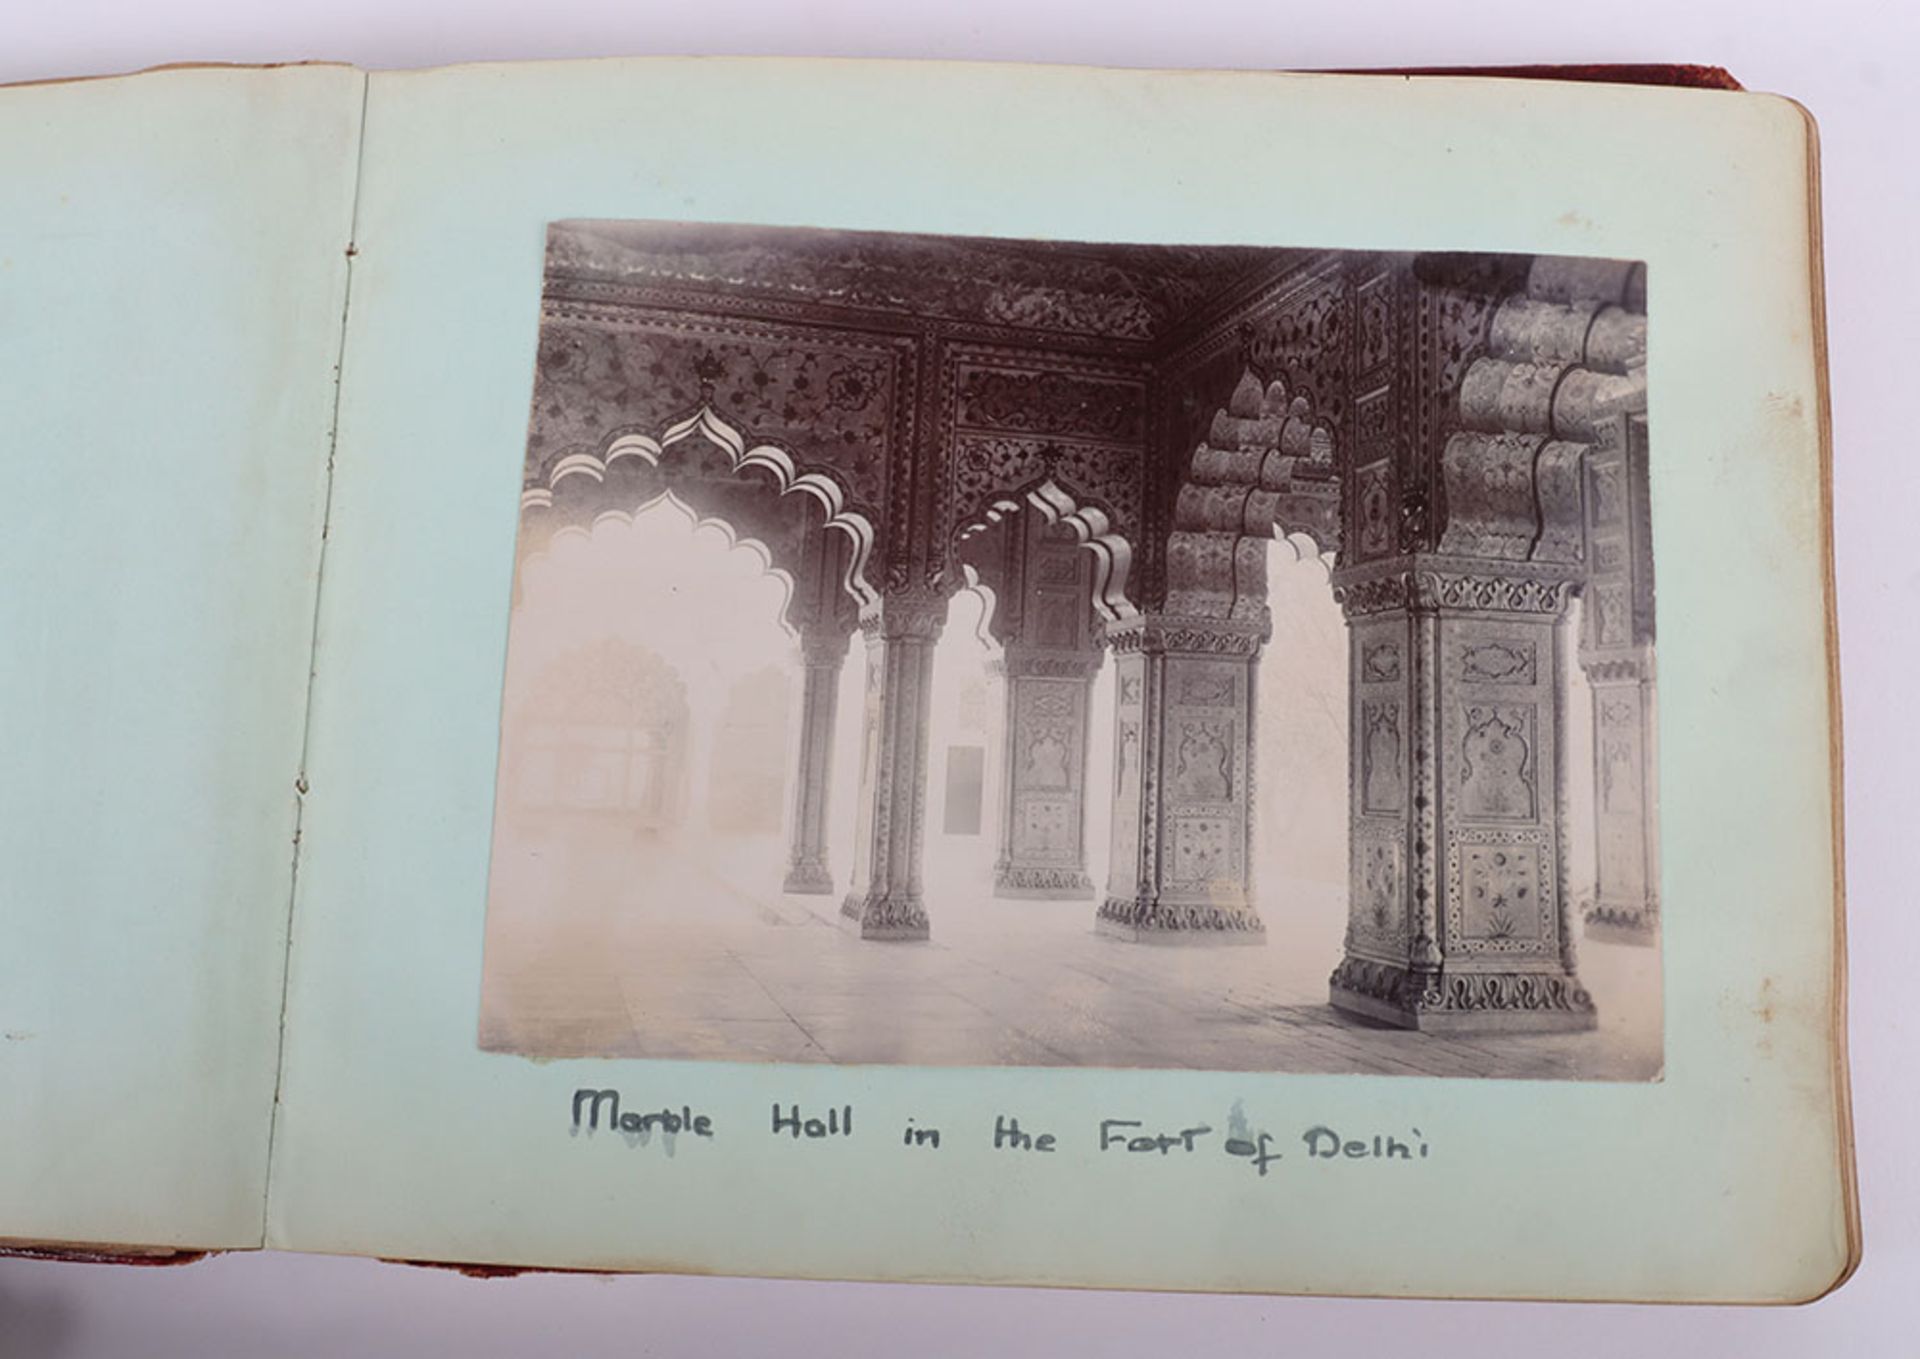 Photograph Album with images of ther Delhi Durbar, troops lining streets, Elephants, sacred cows bel - Image 15 of 48